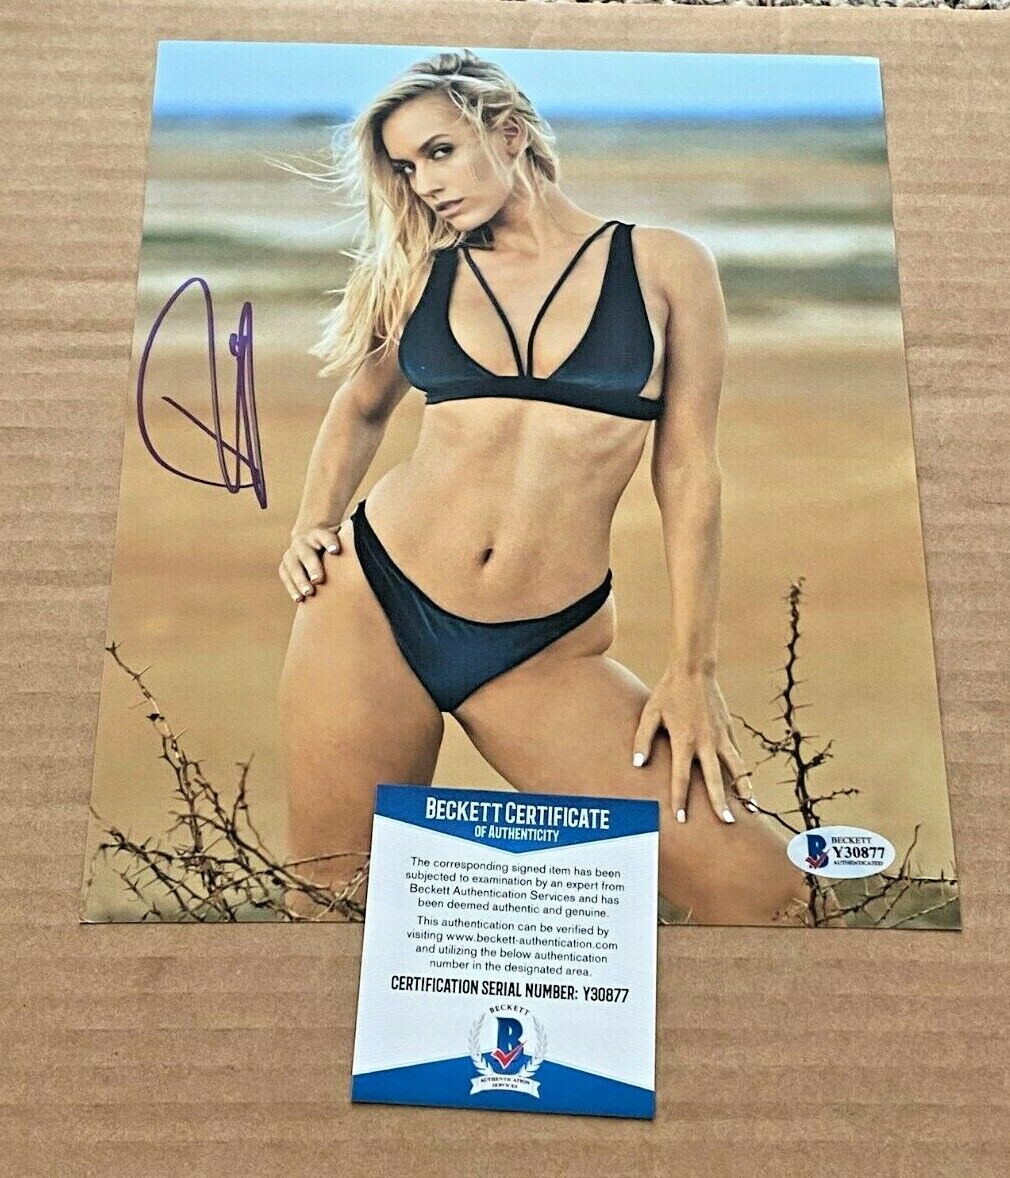 PAIGE SPIRANAC SIGNED SEXY 8X10 Photo Poster painting BECKETT CERTIFIED LPGA GOLF #4